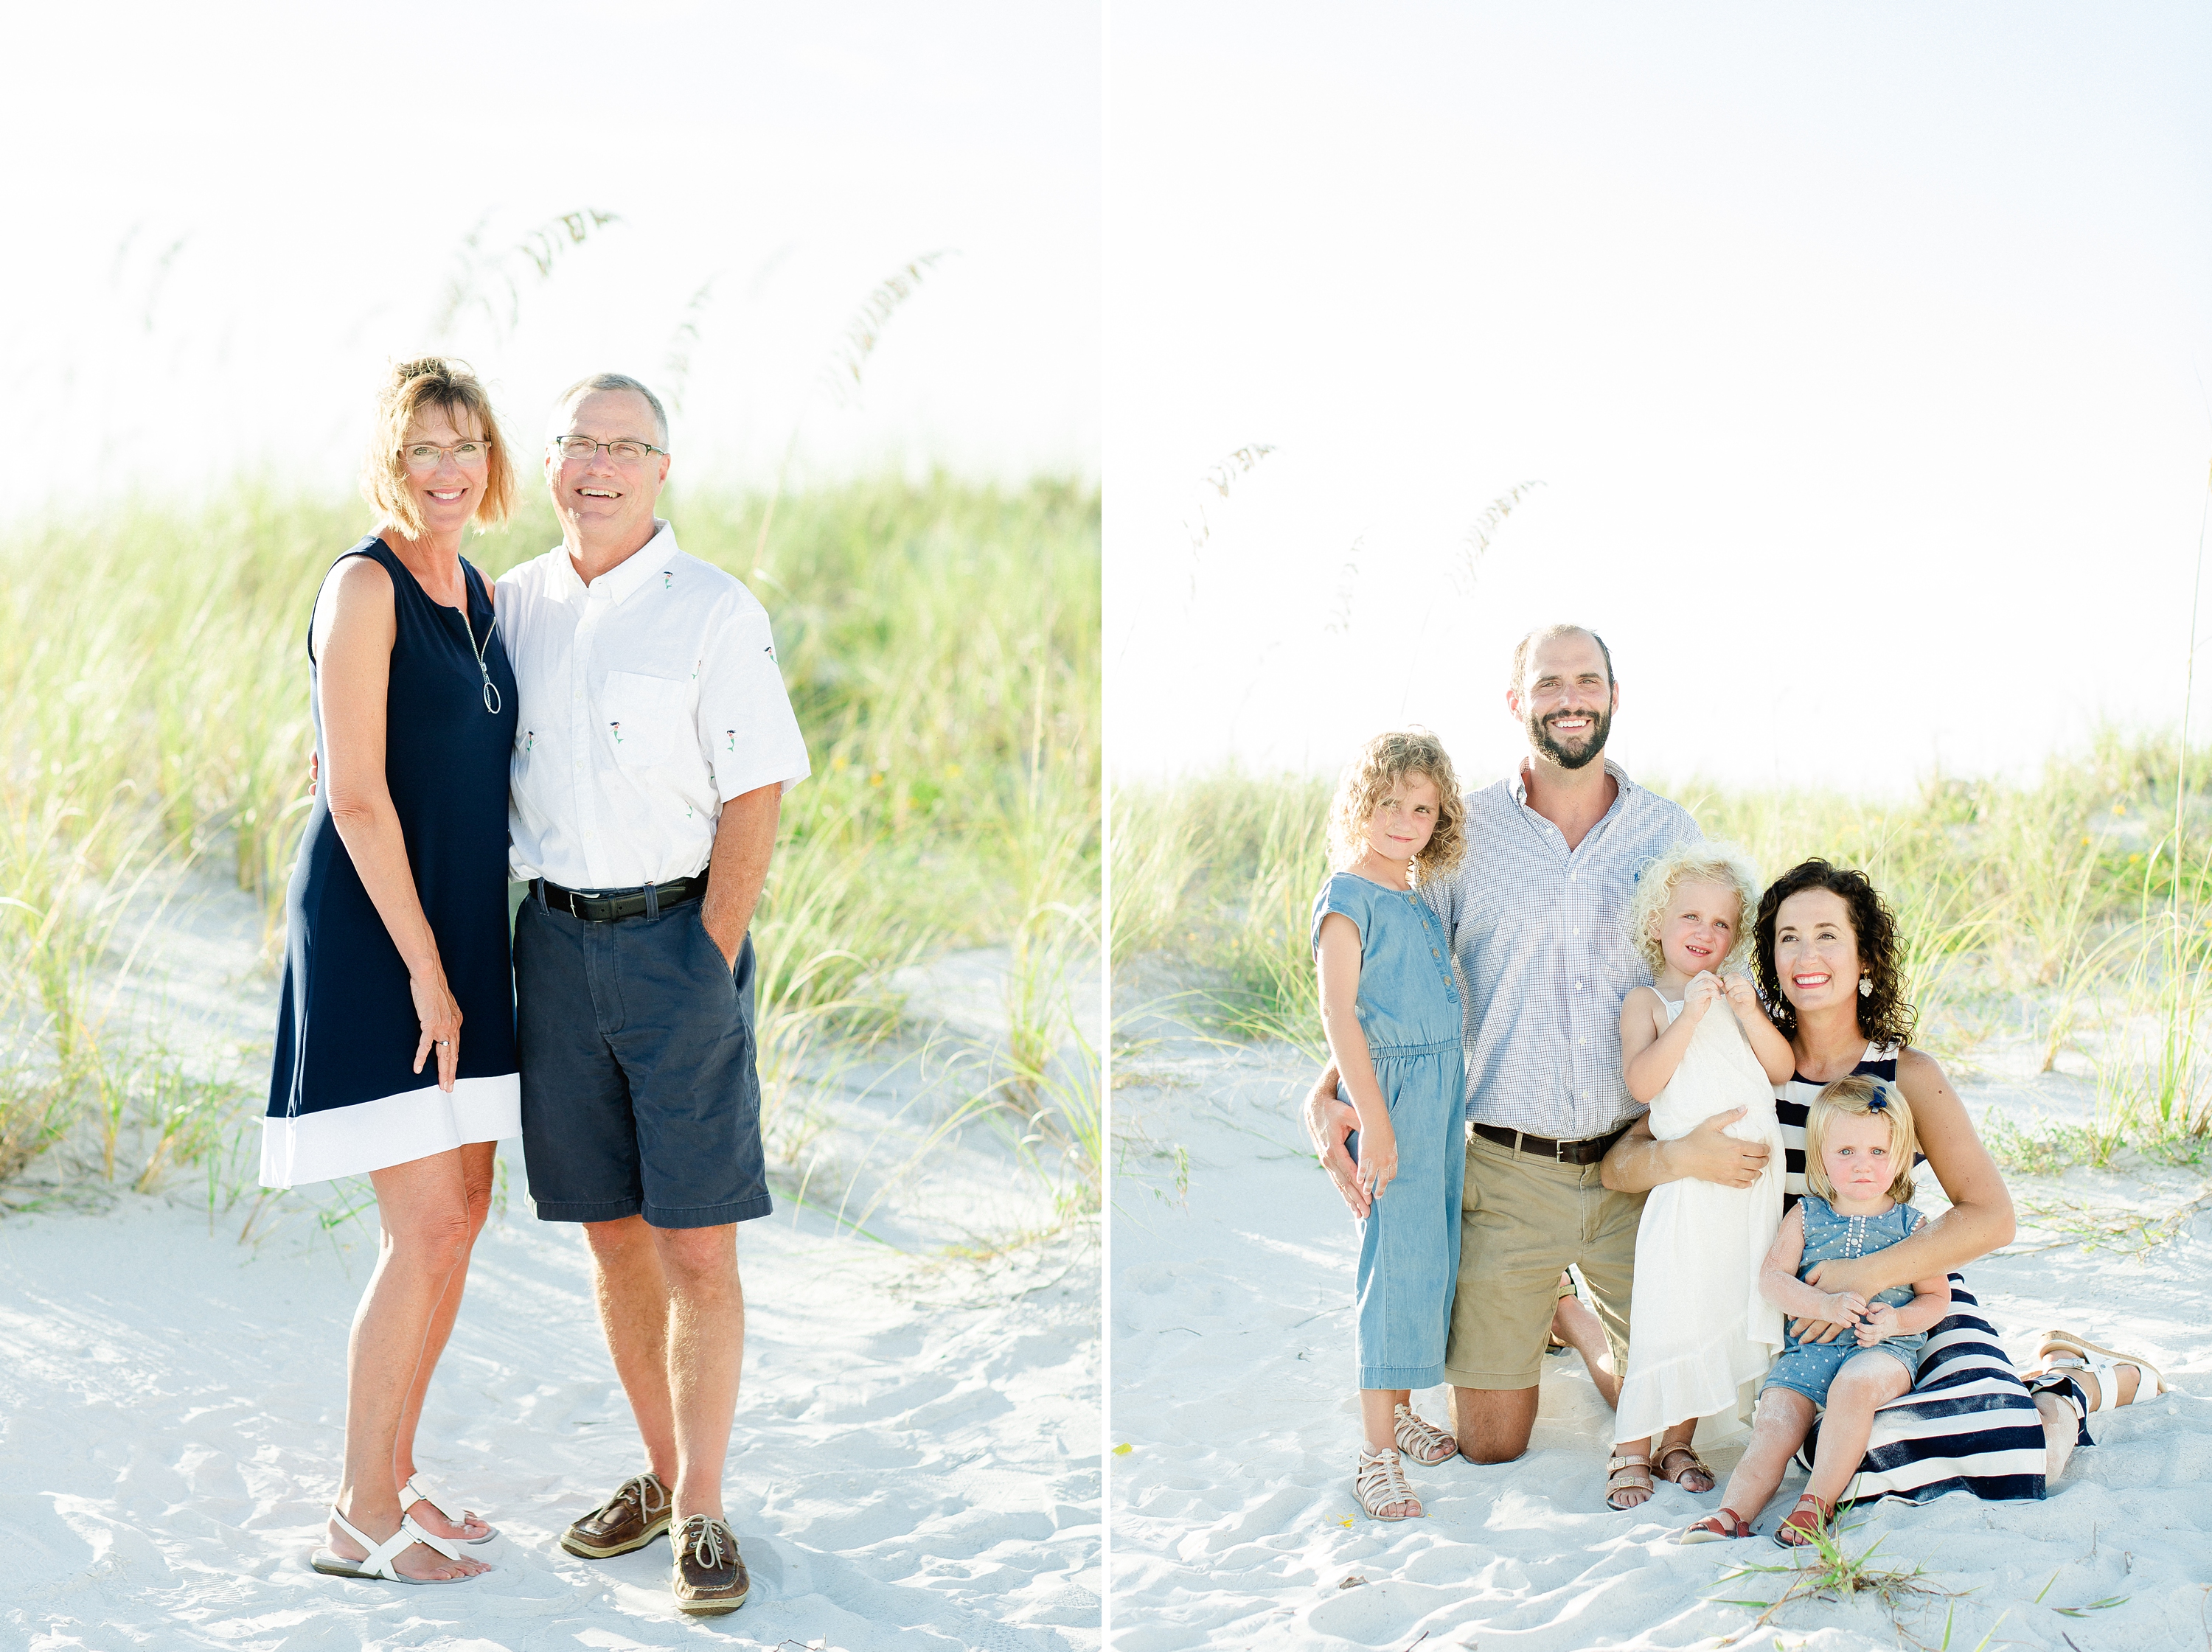 Tampa Family Photographer | © Ailyn LaTorre Photography 2019